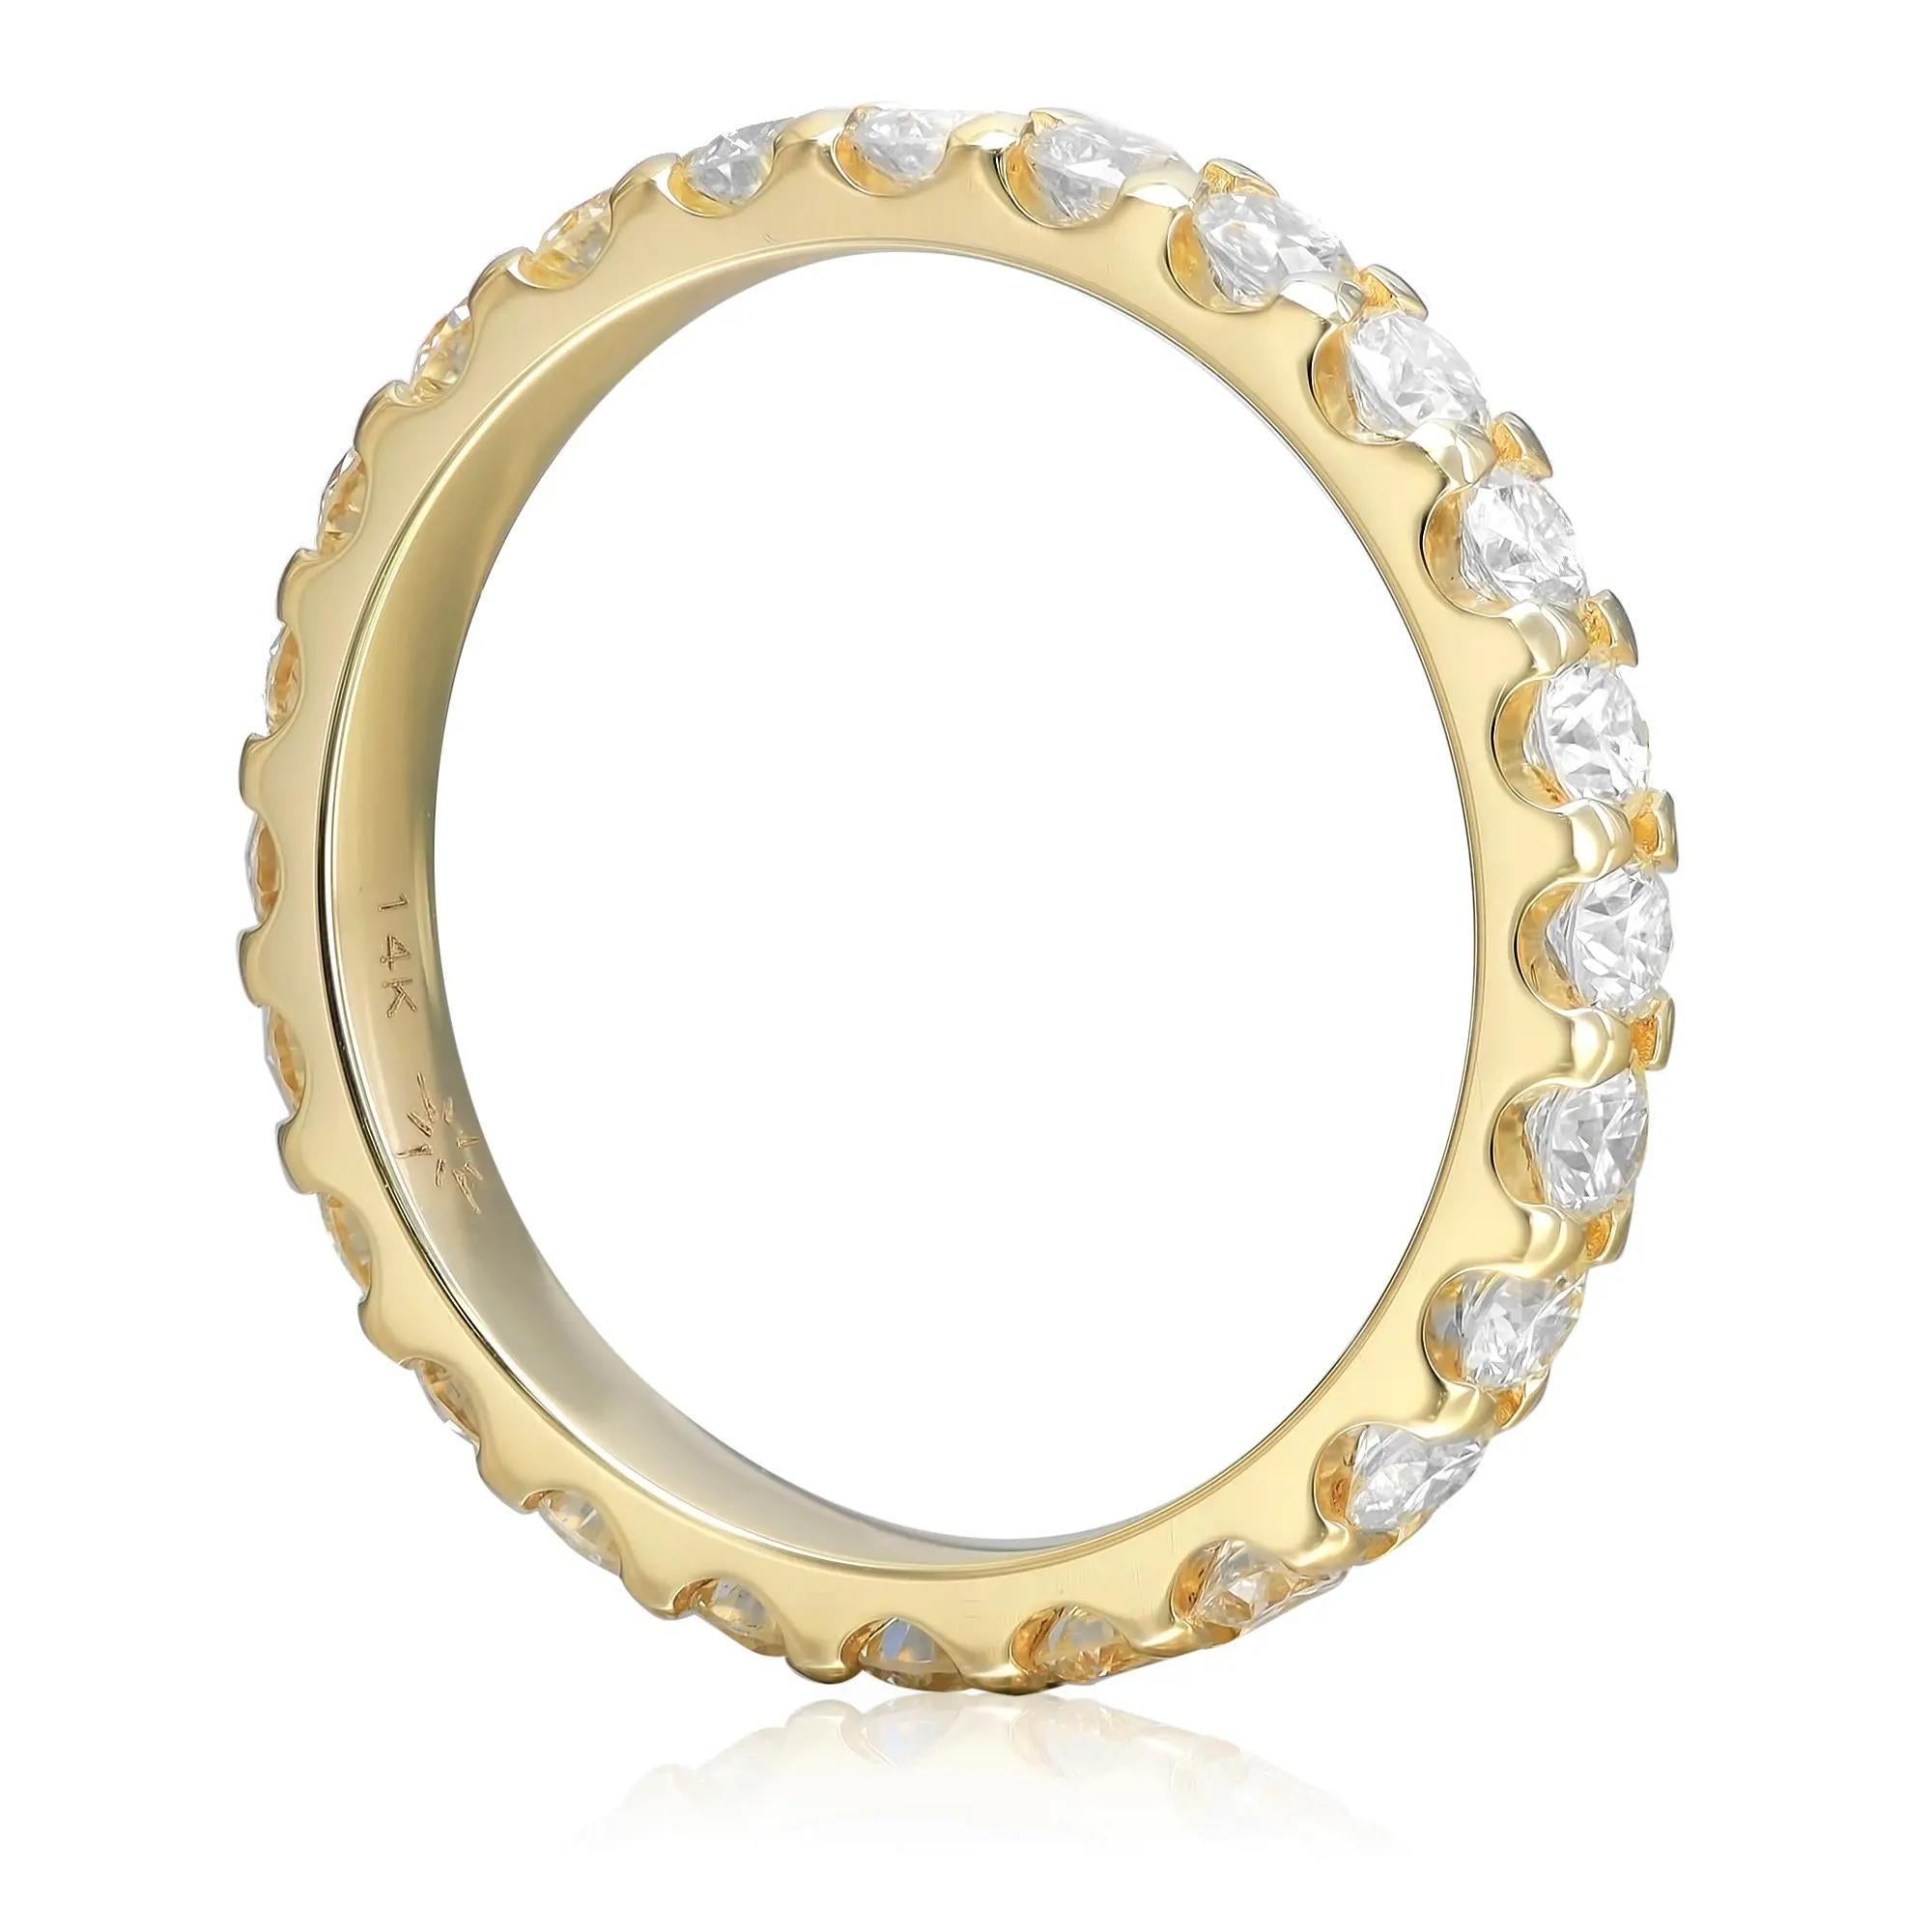 This classic diamond eternity band ring makes a standout addition to your jewelry collection. It features 24 prong set round brilliant cut sparkling diamonds, crafted in 14K yellow gold. Total diamond weight: 1.50 carats. Diamond quality: color H-I